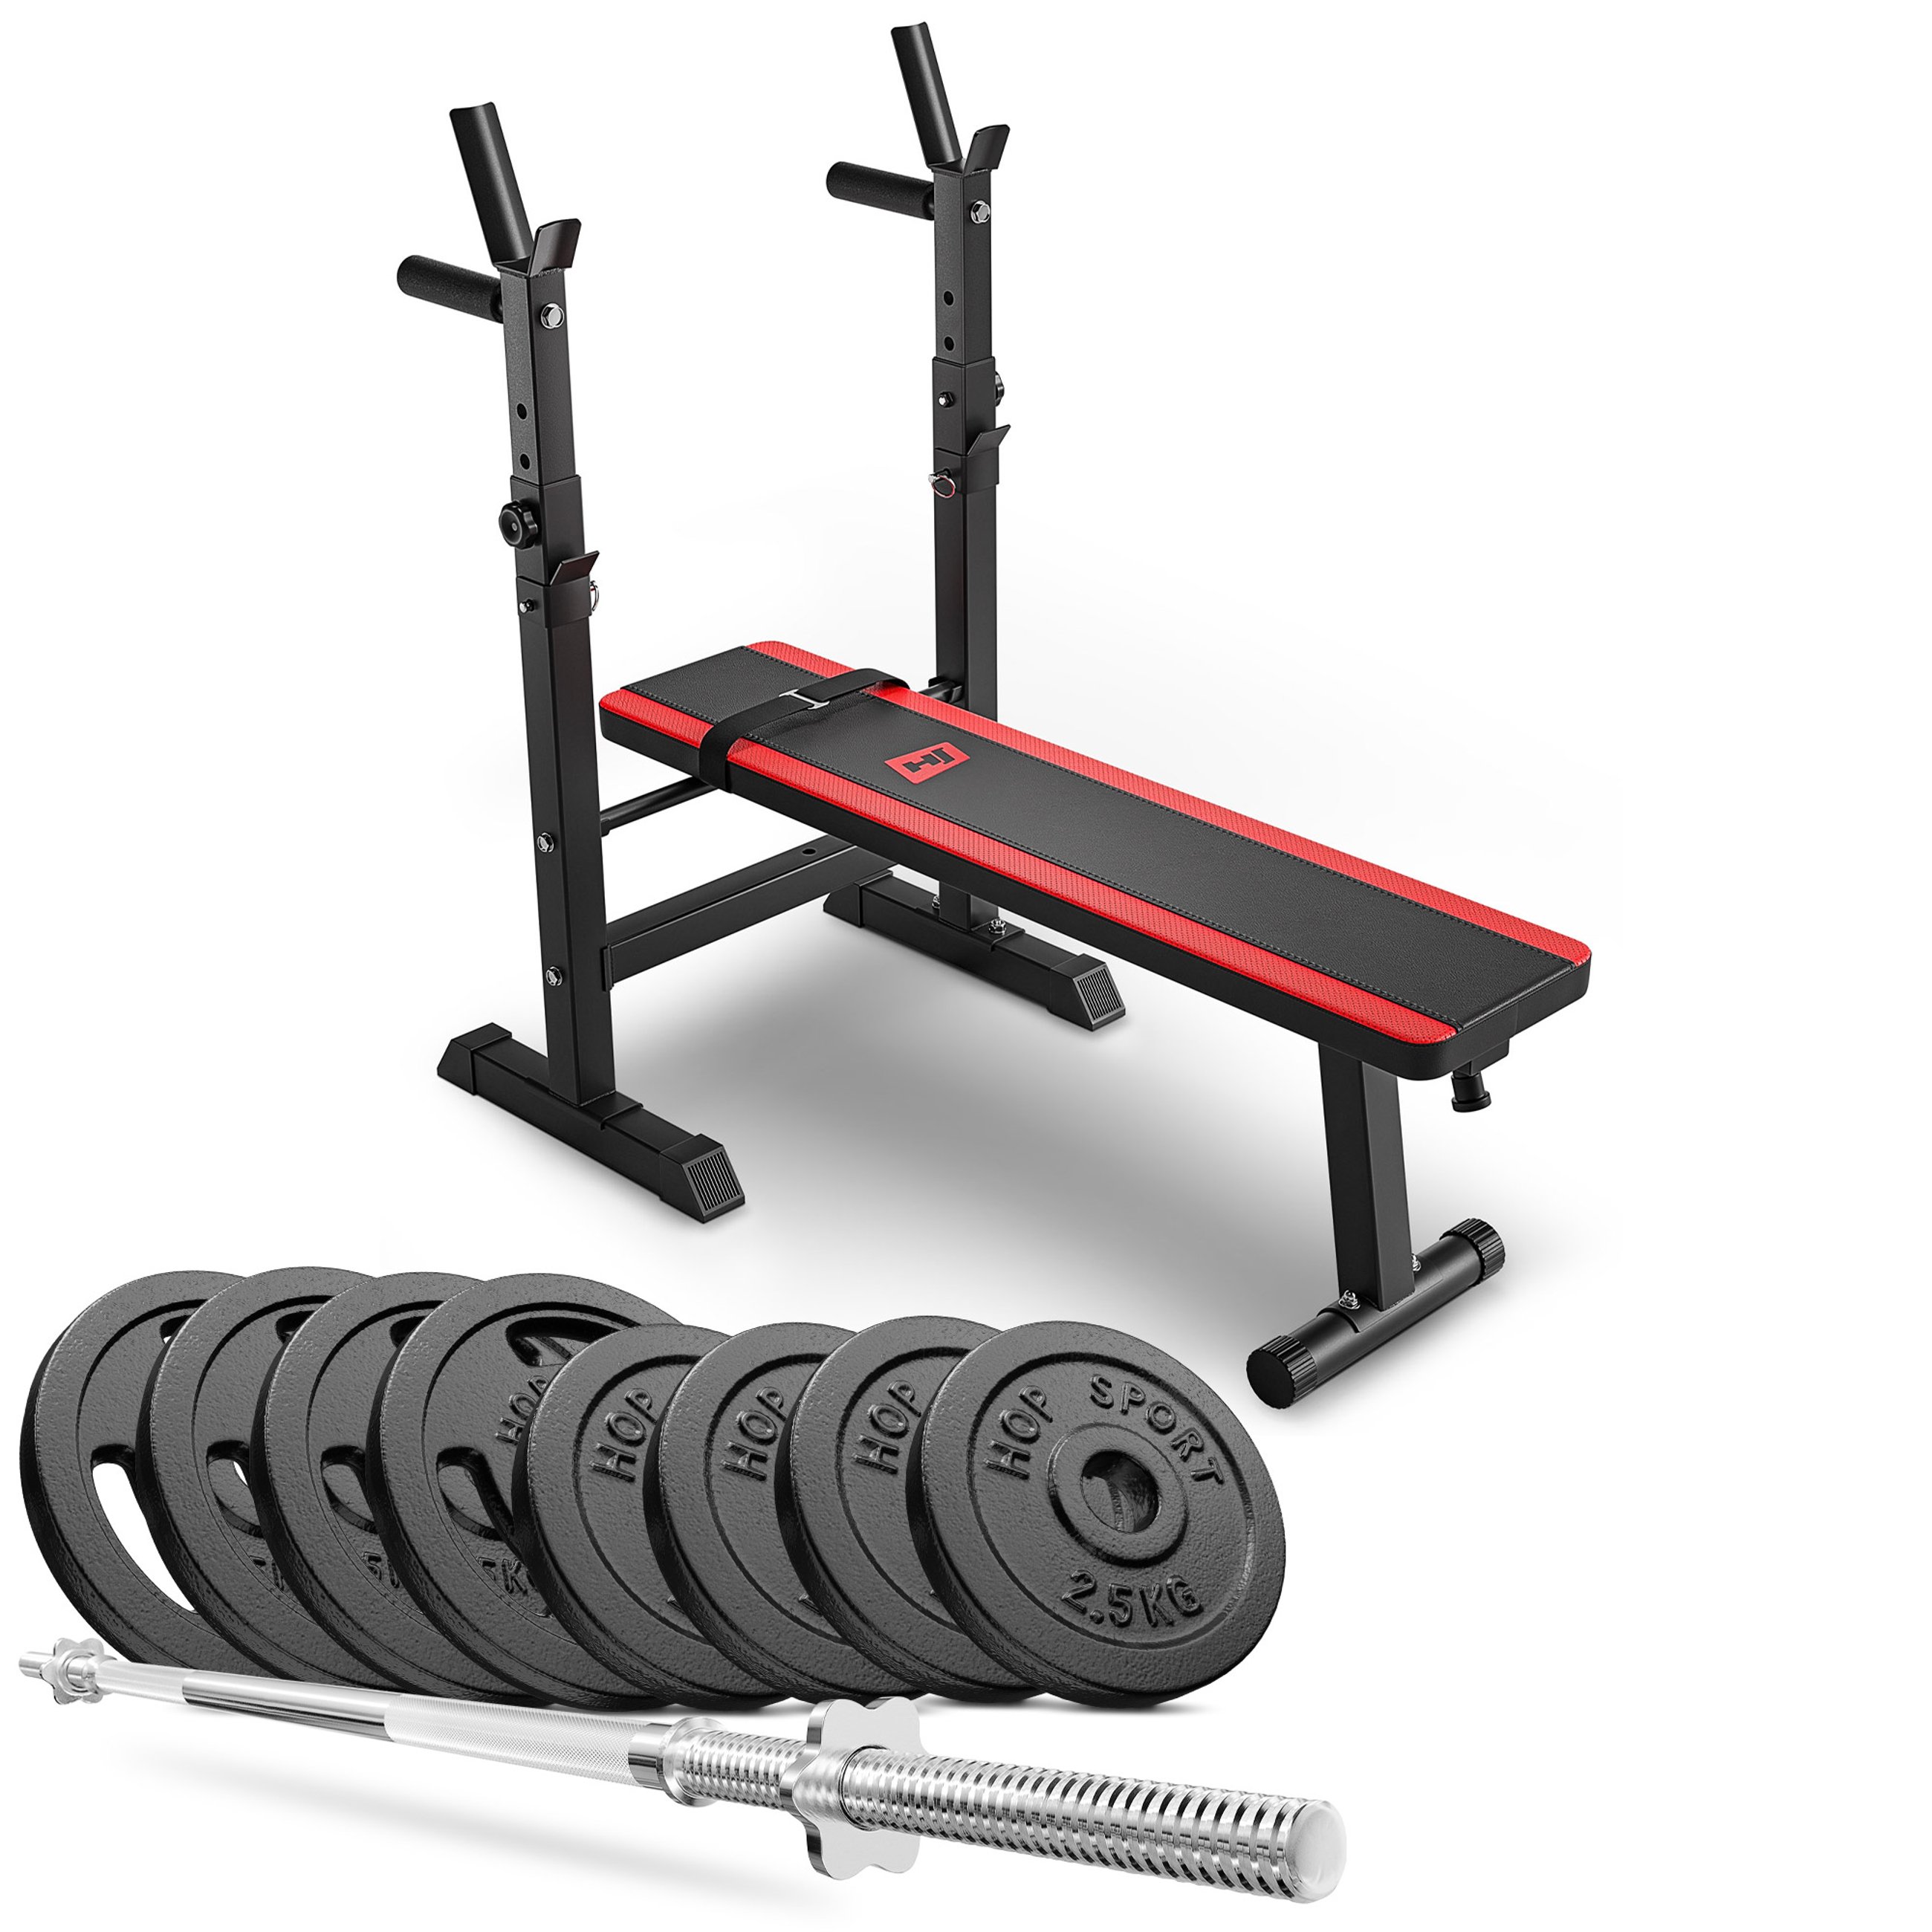 Strong 39 kg Cast Iron Barbell Set with HS-1080 Weight Bench